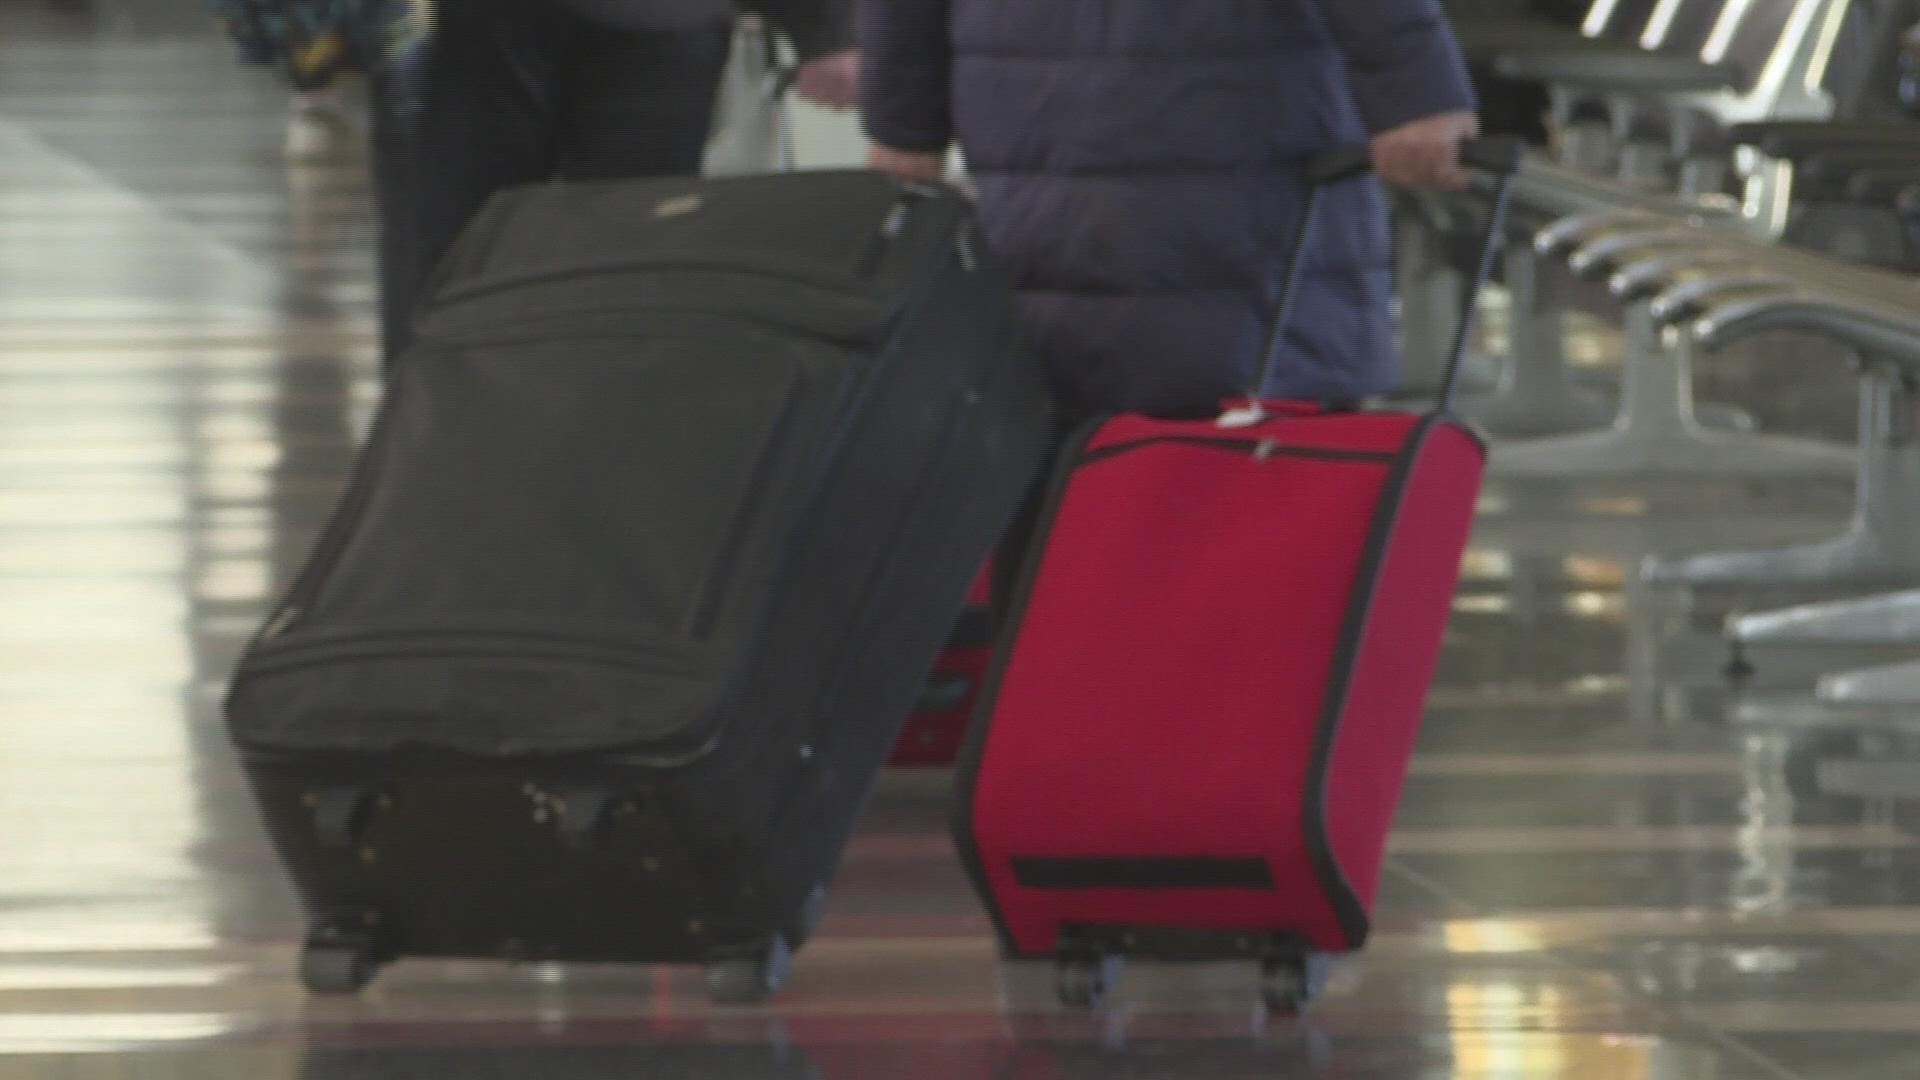 TSA recommends not packing wrapped gifts in carry-on, checked bag ...